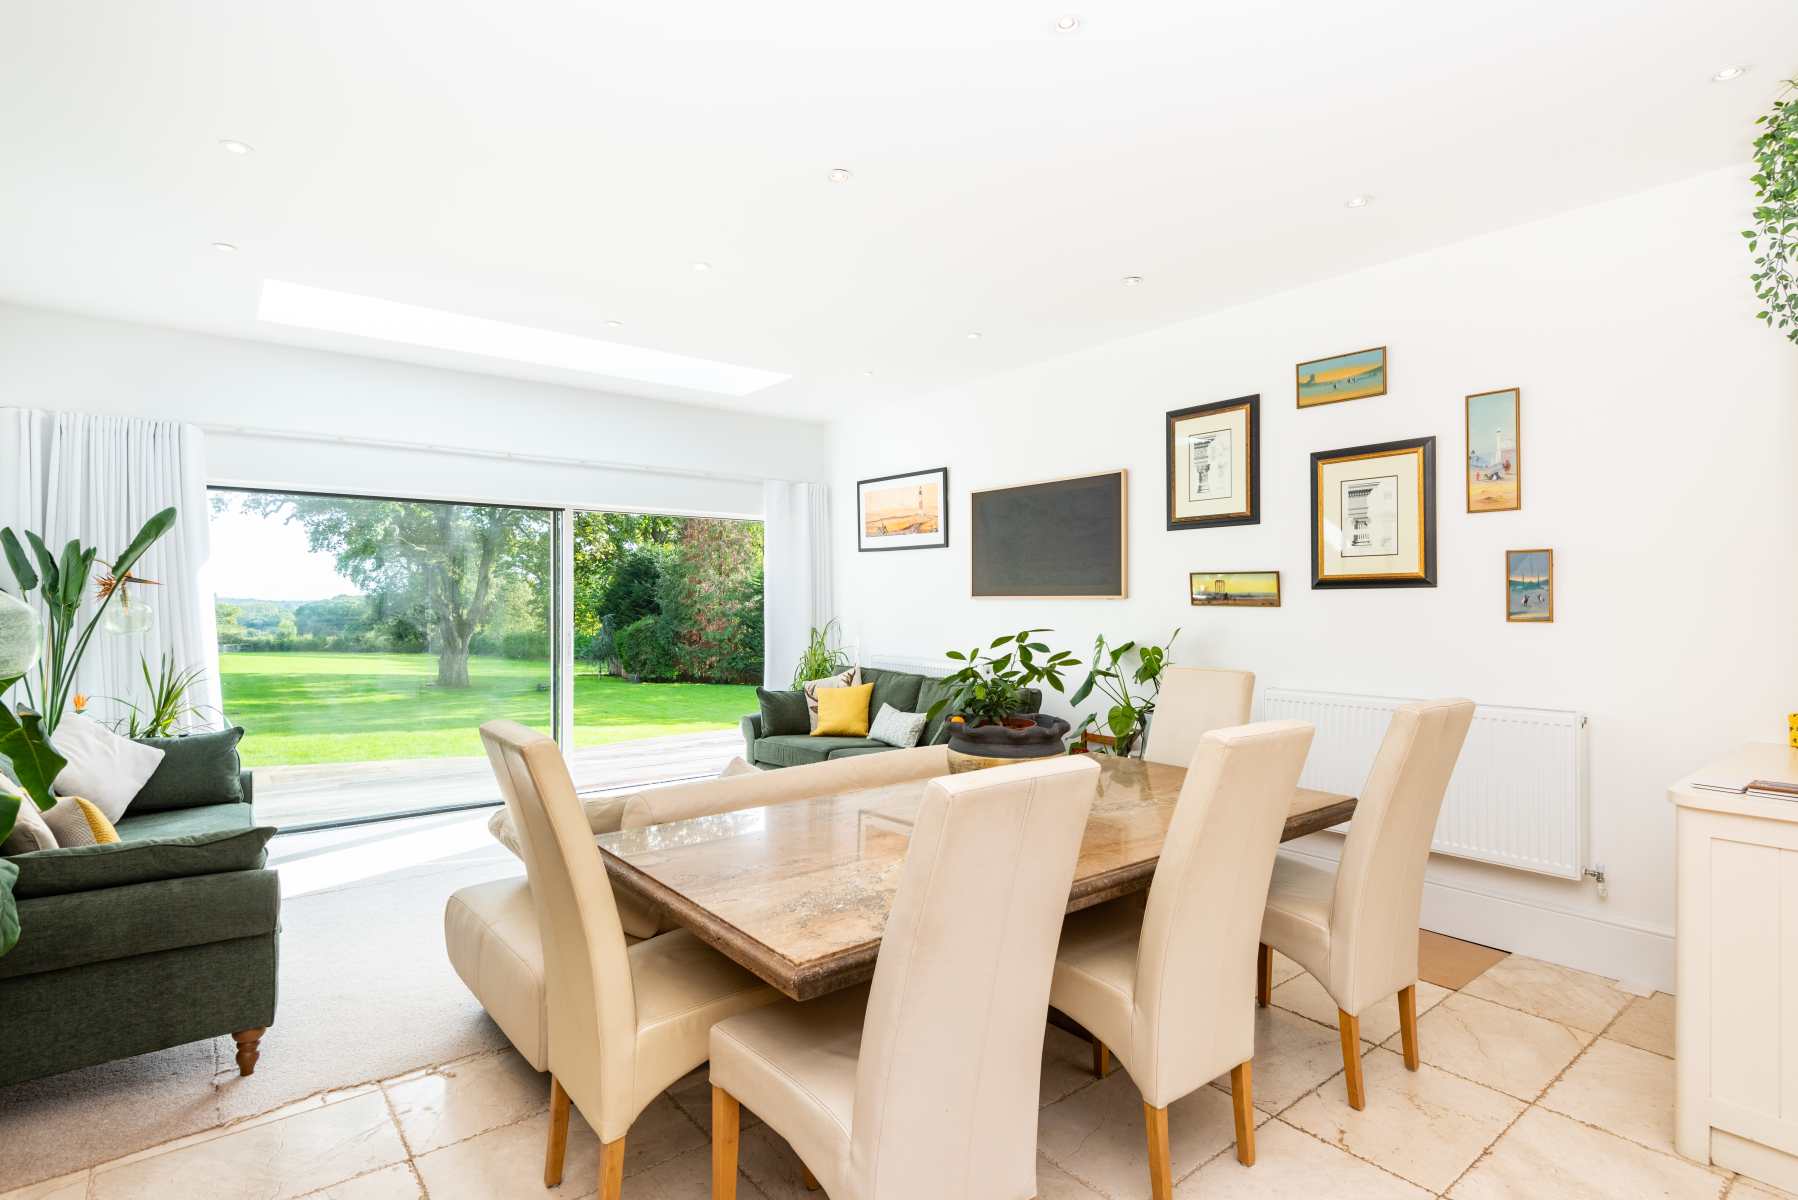 Interior view of a newly renovated dining room with contemporary decor and natural light.